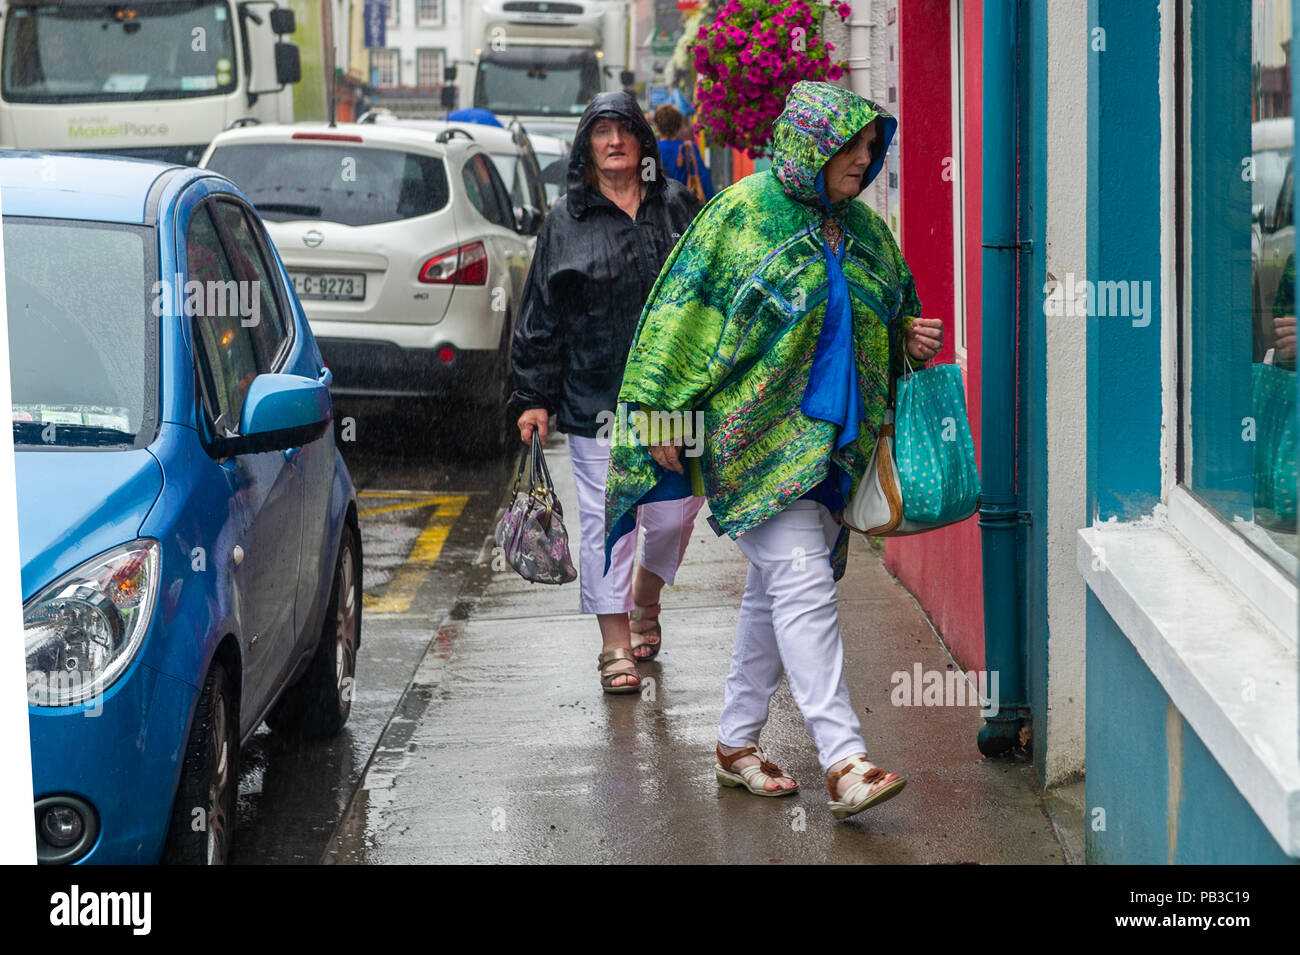 Skibbereen, West Cork, Ireland. 26th July, 2018. After weeks of an Irish Heatwave, which brought blisteringly hot temperatures, rain finally hit the West Cork region of Ireland today. The rain is expected to last until at least next week. Credit: Andy Gibson/Alamy Live News. Stock Photo